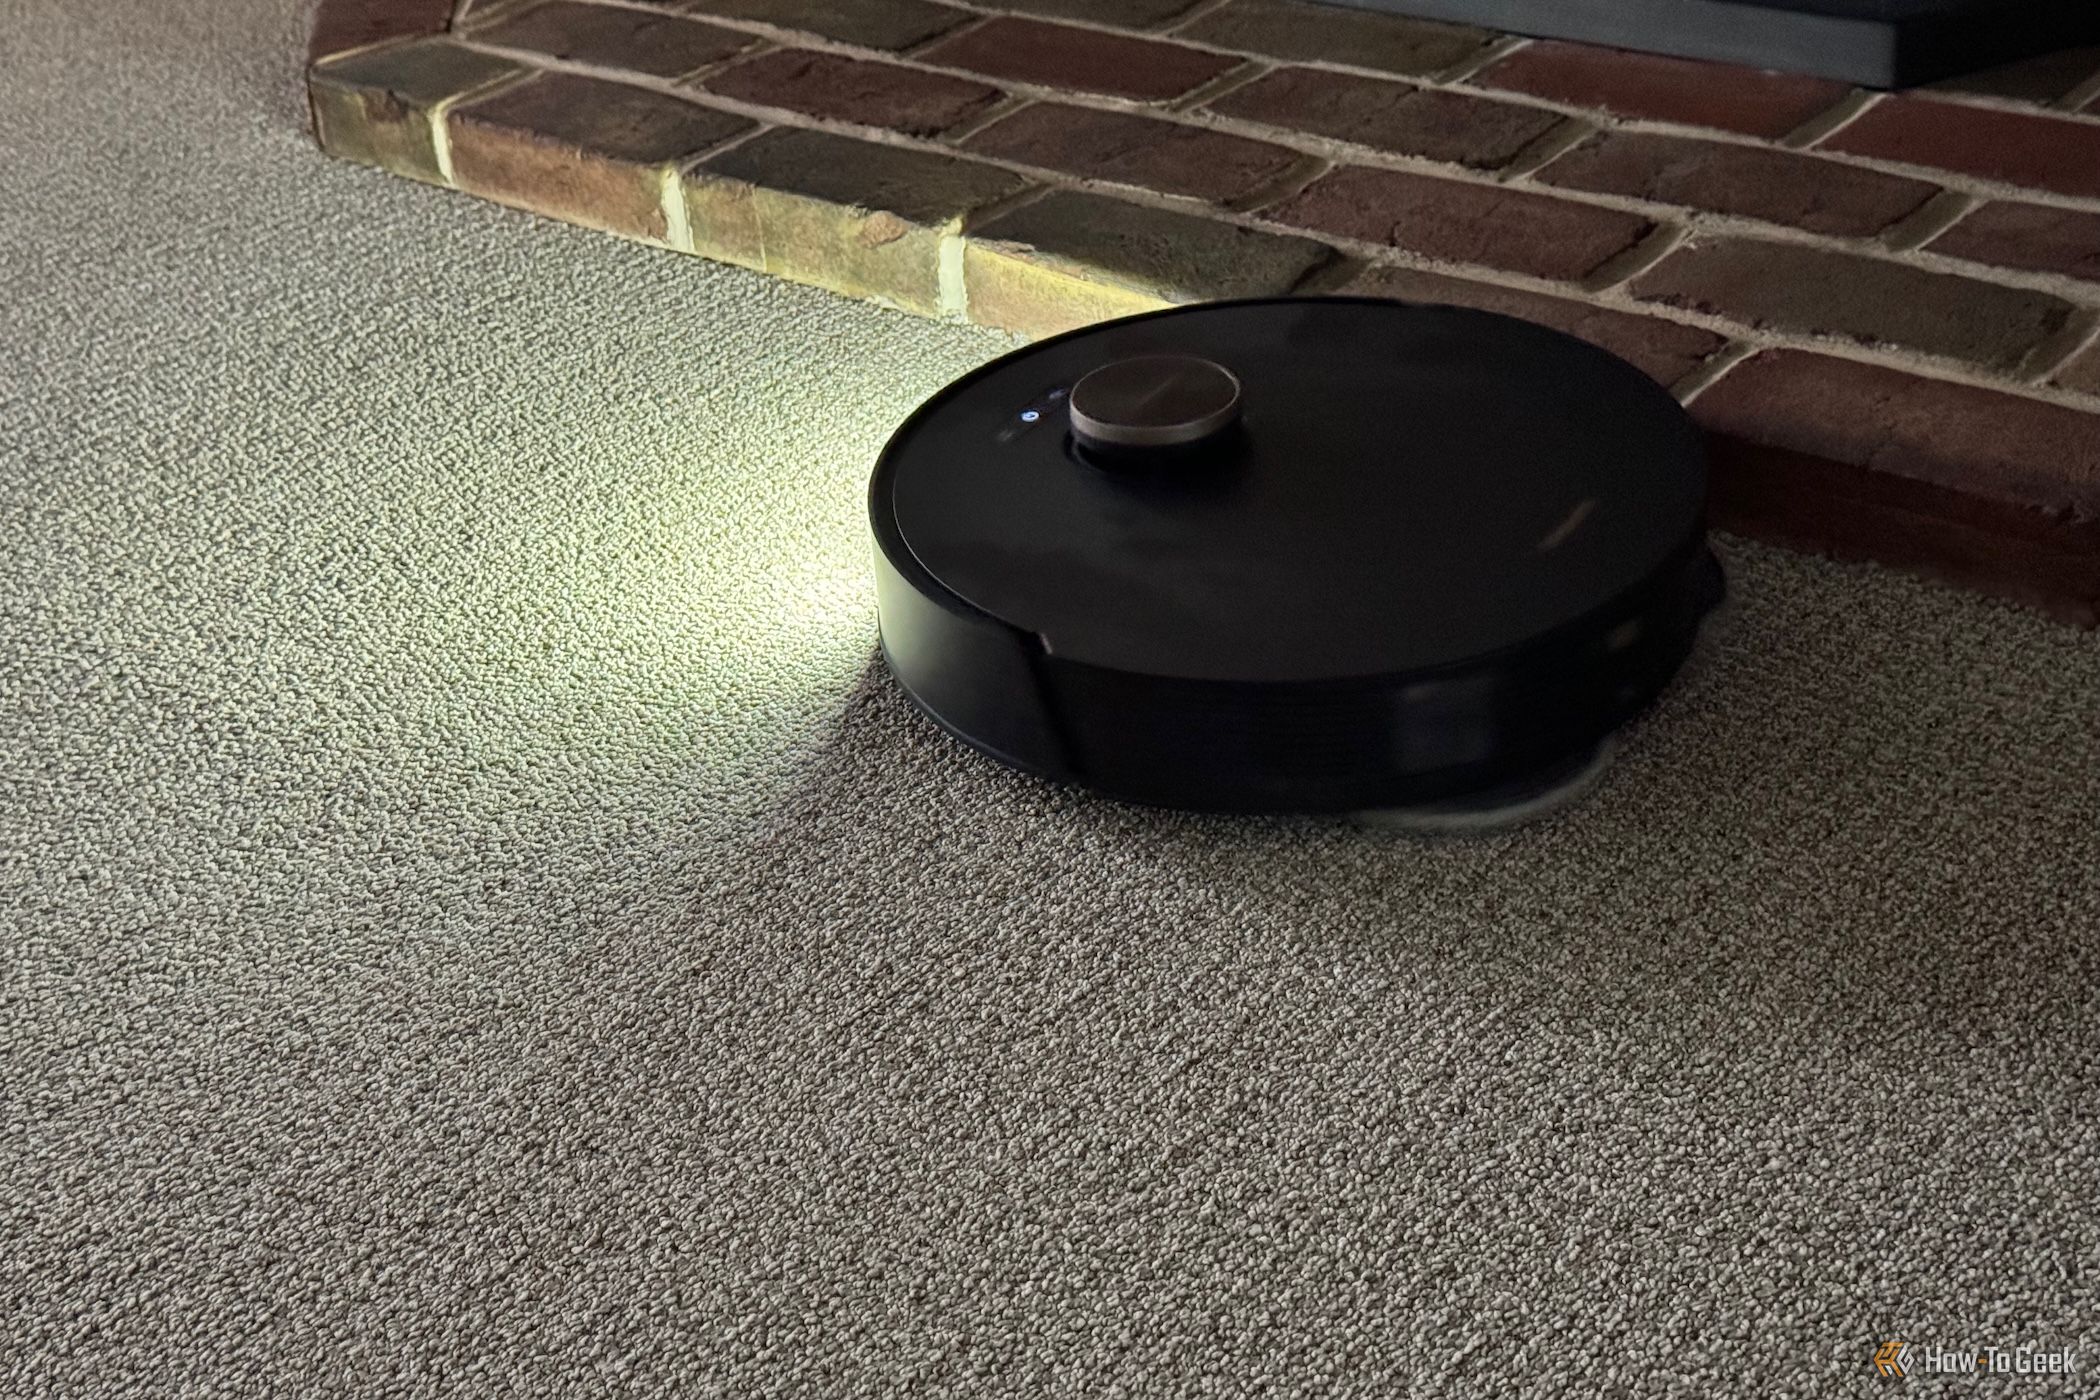 DreameBot L20 Ultra review: This robot vacuum is crazy intelligent